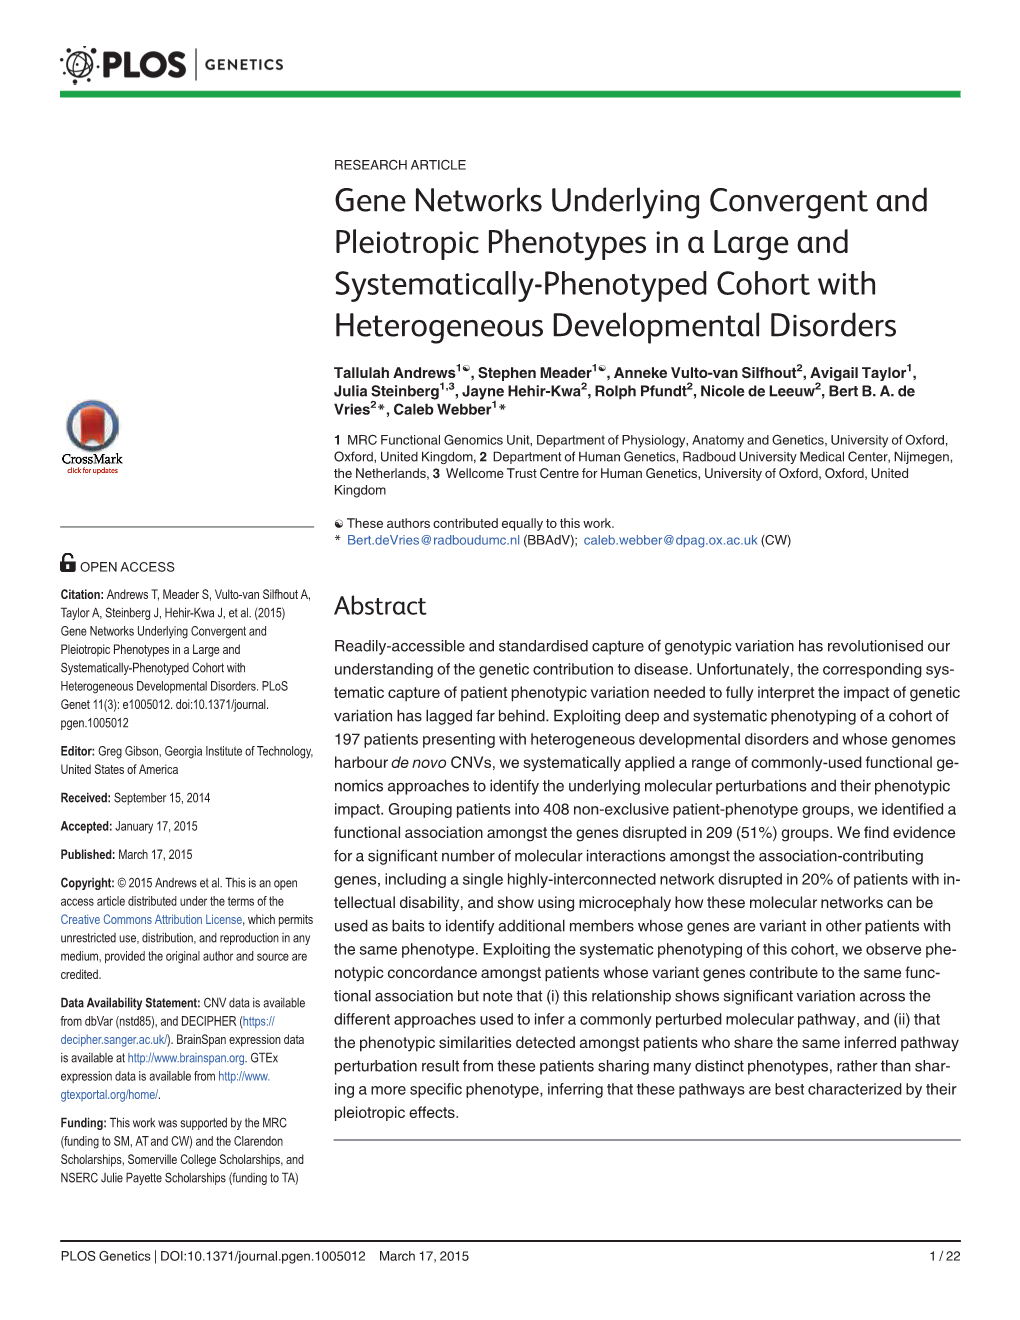 Gene Networks Underlying Convergent and Pleiotropic Phenotypes in a Large and Systematically-Phenotyped Cohort with Heterogeneous Developmental Disorders